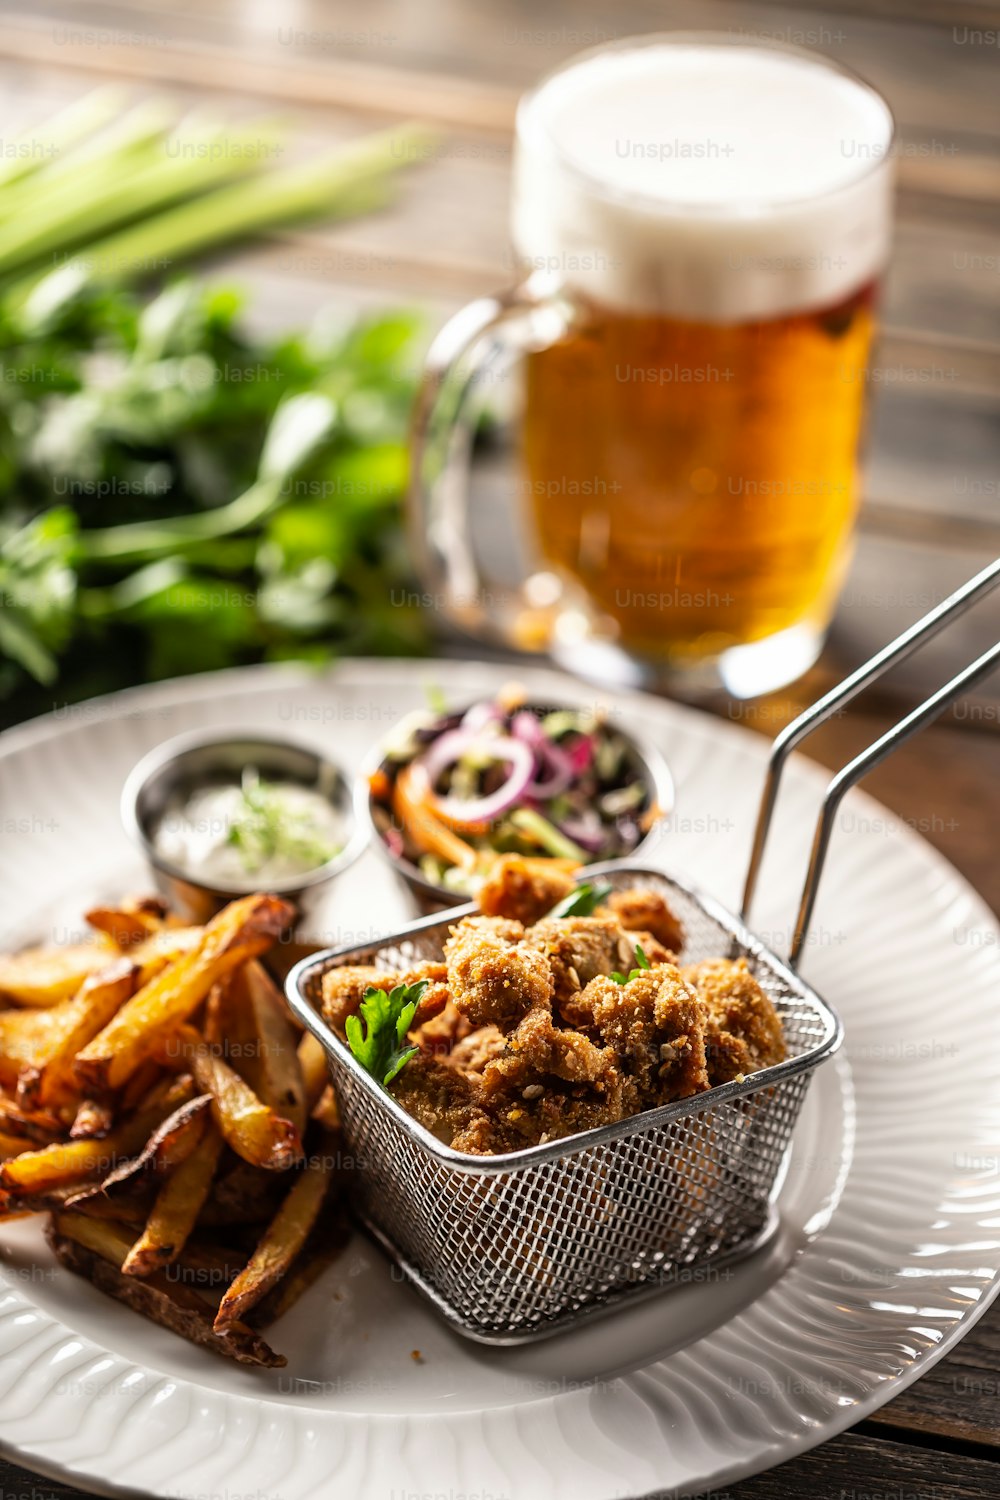 Fried chicken nuggets with french fries, dip, salad and beer.